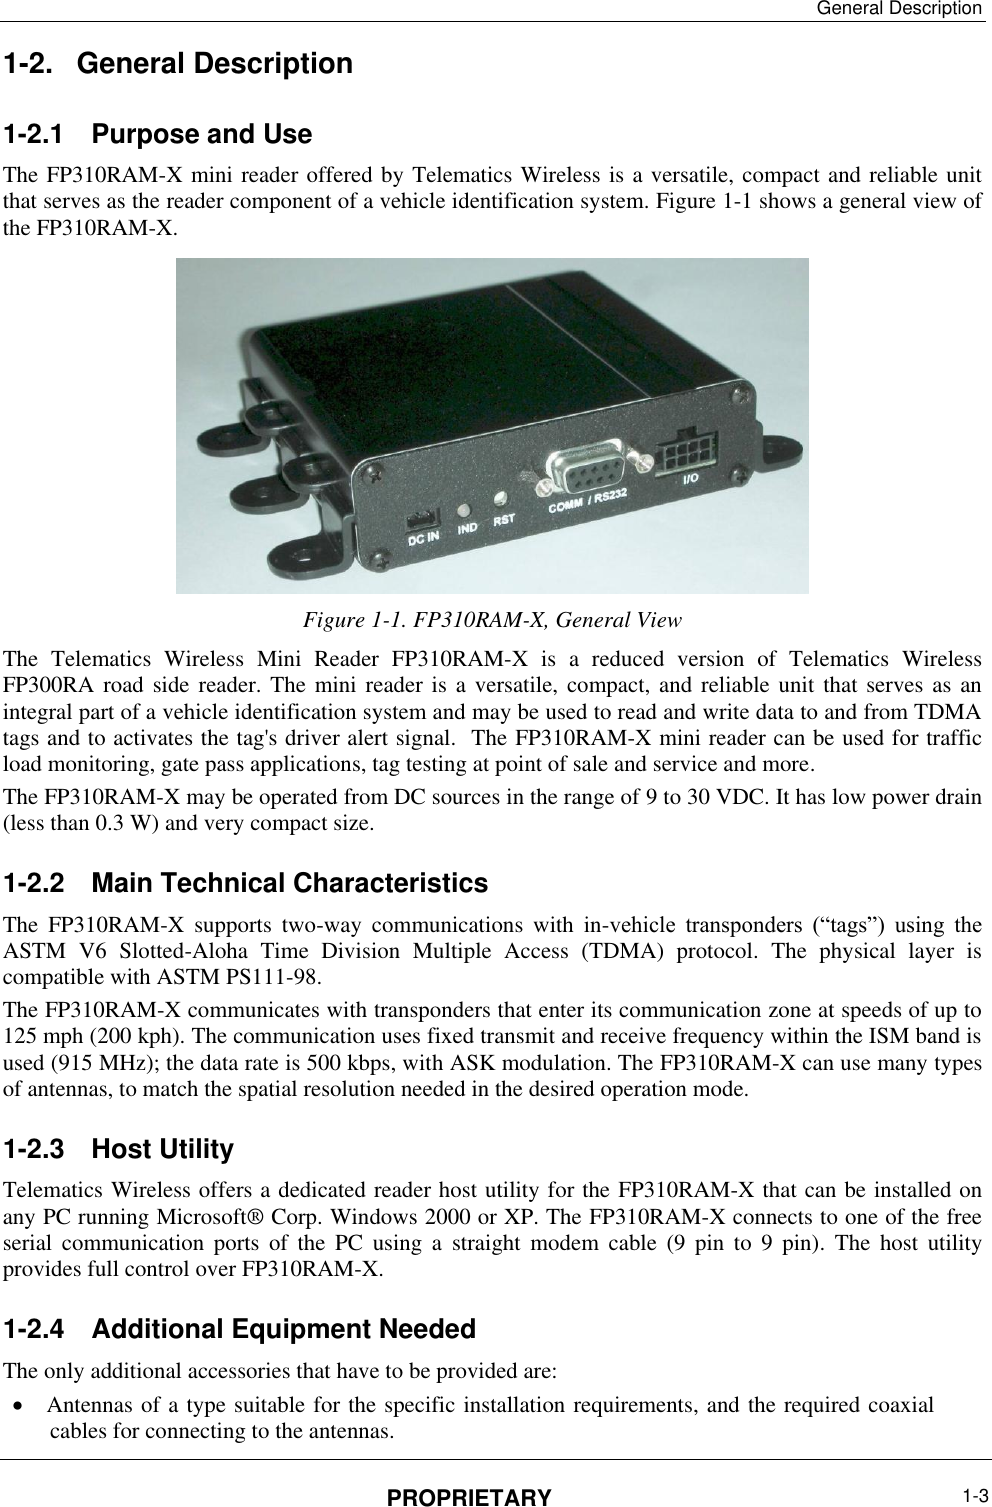 General Description PROPRIETARY  1-3  1-2.  General Description 1-2.1  Purpose and Use  The FP310RAM-X mini reader offered by Telematics Wireless is a versatile, compact and reliable unit that serves as the reader component of a vehicle identification system. Figure ‎1-1 shows a general view of the FP310RAM-X.  Figure ‎1-1. FP310RAM-X, General View The  Telematics  Wireless  Mini  Reader  FP310RAM-X  is  a  reduced  version  of  Telematics  Wireless FP300RA road  side reader.  The mini reader is a  versatile, compact, and reliable unit that serves as  an integral part of a vehicle identification system and may be used to read and write data to and from TDMA tags and to activates the tag&apos;s driver alert signal.  The FP310RAM-X mini reader can be used for traffic load monitoring, gate pass applications, tag testing at point of sale and service and more.  The FP310RAM-X may be operated from DC sources in the range of 9 to 30 VDC. It has low power drain (less than 0.3 W) and very compact size. 1-2.2  Main Technical Characteristics The  FP310RAM-X  supports  two-way  communications  with  in-vehicle  transponders  (“tags”)  using  the ASTM  V6  Slotted-Aloha  Time  Division  Multiple  Access  (TDMA)  protocol.  The  physical  layer  is compatible with ASTM PS111-98. The FP310RAM-X communicates with transponders that enter its communication zone at speeds of up to 125 mph (200 kph). The communication uses fixed transmit and receive frequency within the ISM band is used (915 MHz); the data rate is 500 kbps, with ASK modulation. The FP310RAM-X can use many types of antennas, to match the spatial resolution needed in the desired operation mode. 1-2.3  Host Utility Telematics Wireless offers a dedicated reader host utility for the FP310RAM-X that can be installed on any PC running Microsoft® Corp. Windows 2000 or XP. The FP310RAM-X connects to one of the free serial  communication  ports  of  the  PC  using  a  straight  modem  cable  (9  pin  to  9  pin).  The  host  utility provides full control over FP310RAM-X. 1-2.4  Additional Equipment Needed The only additional accessories that have to be provided are:  Antennas of a type suitable for the specific installation requirements, and the required coaxial cables for connecting to the antennas. 